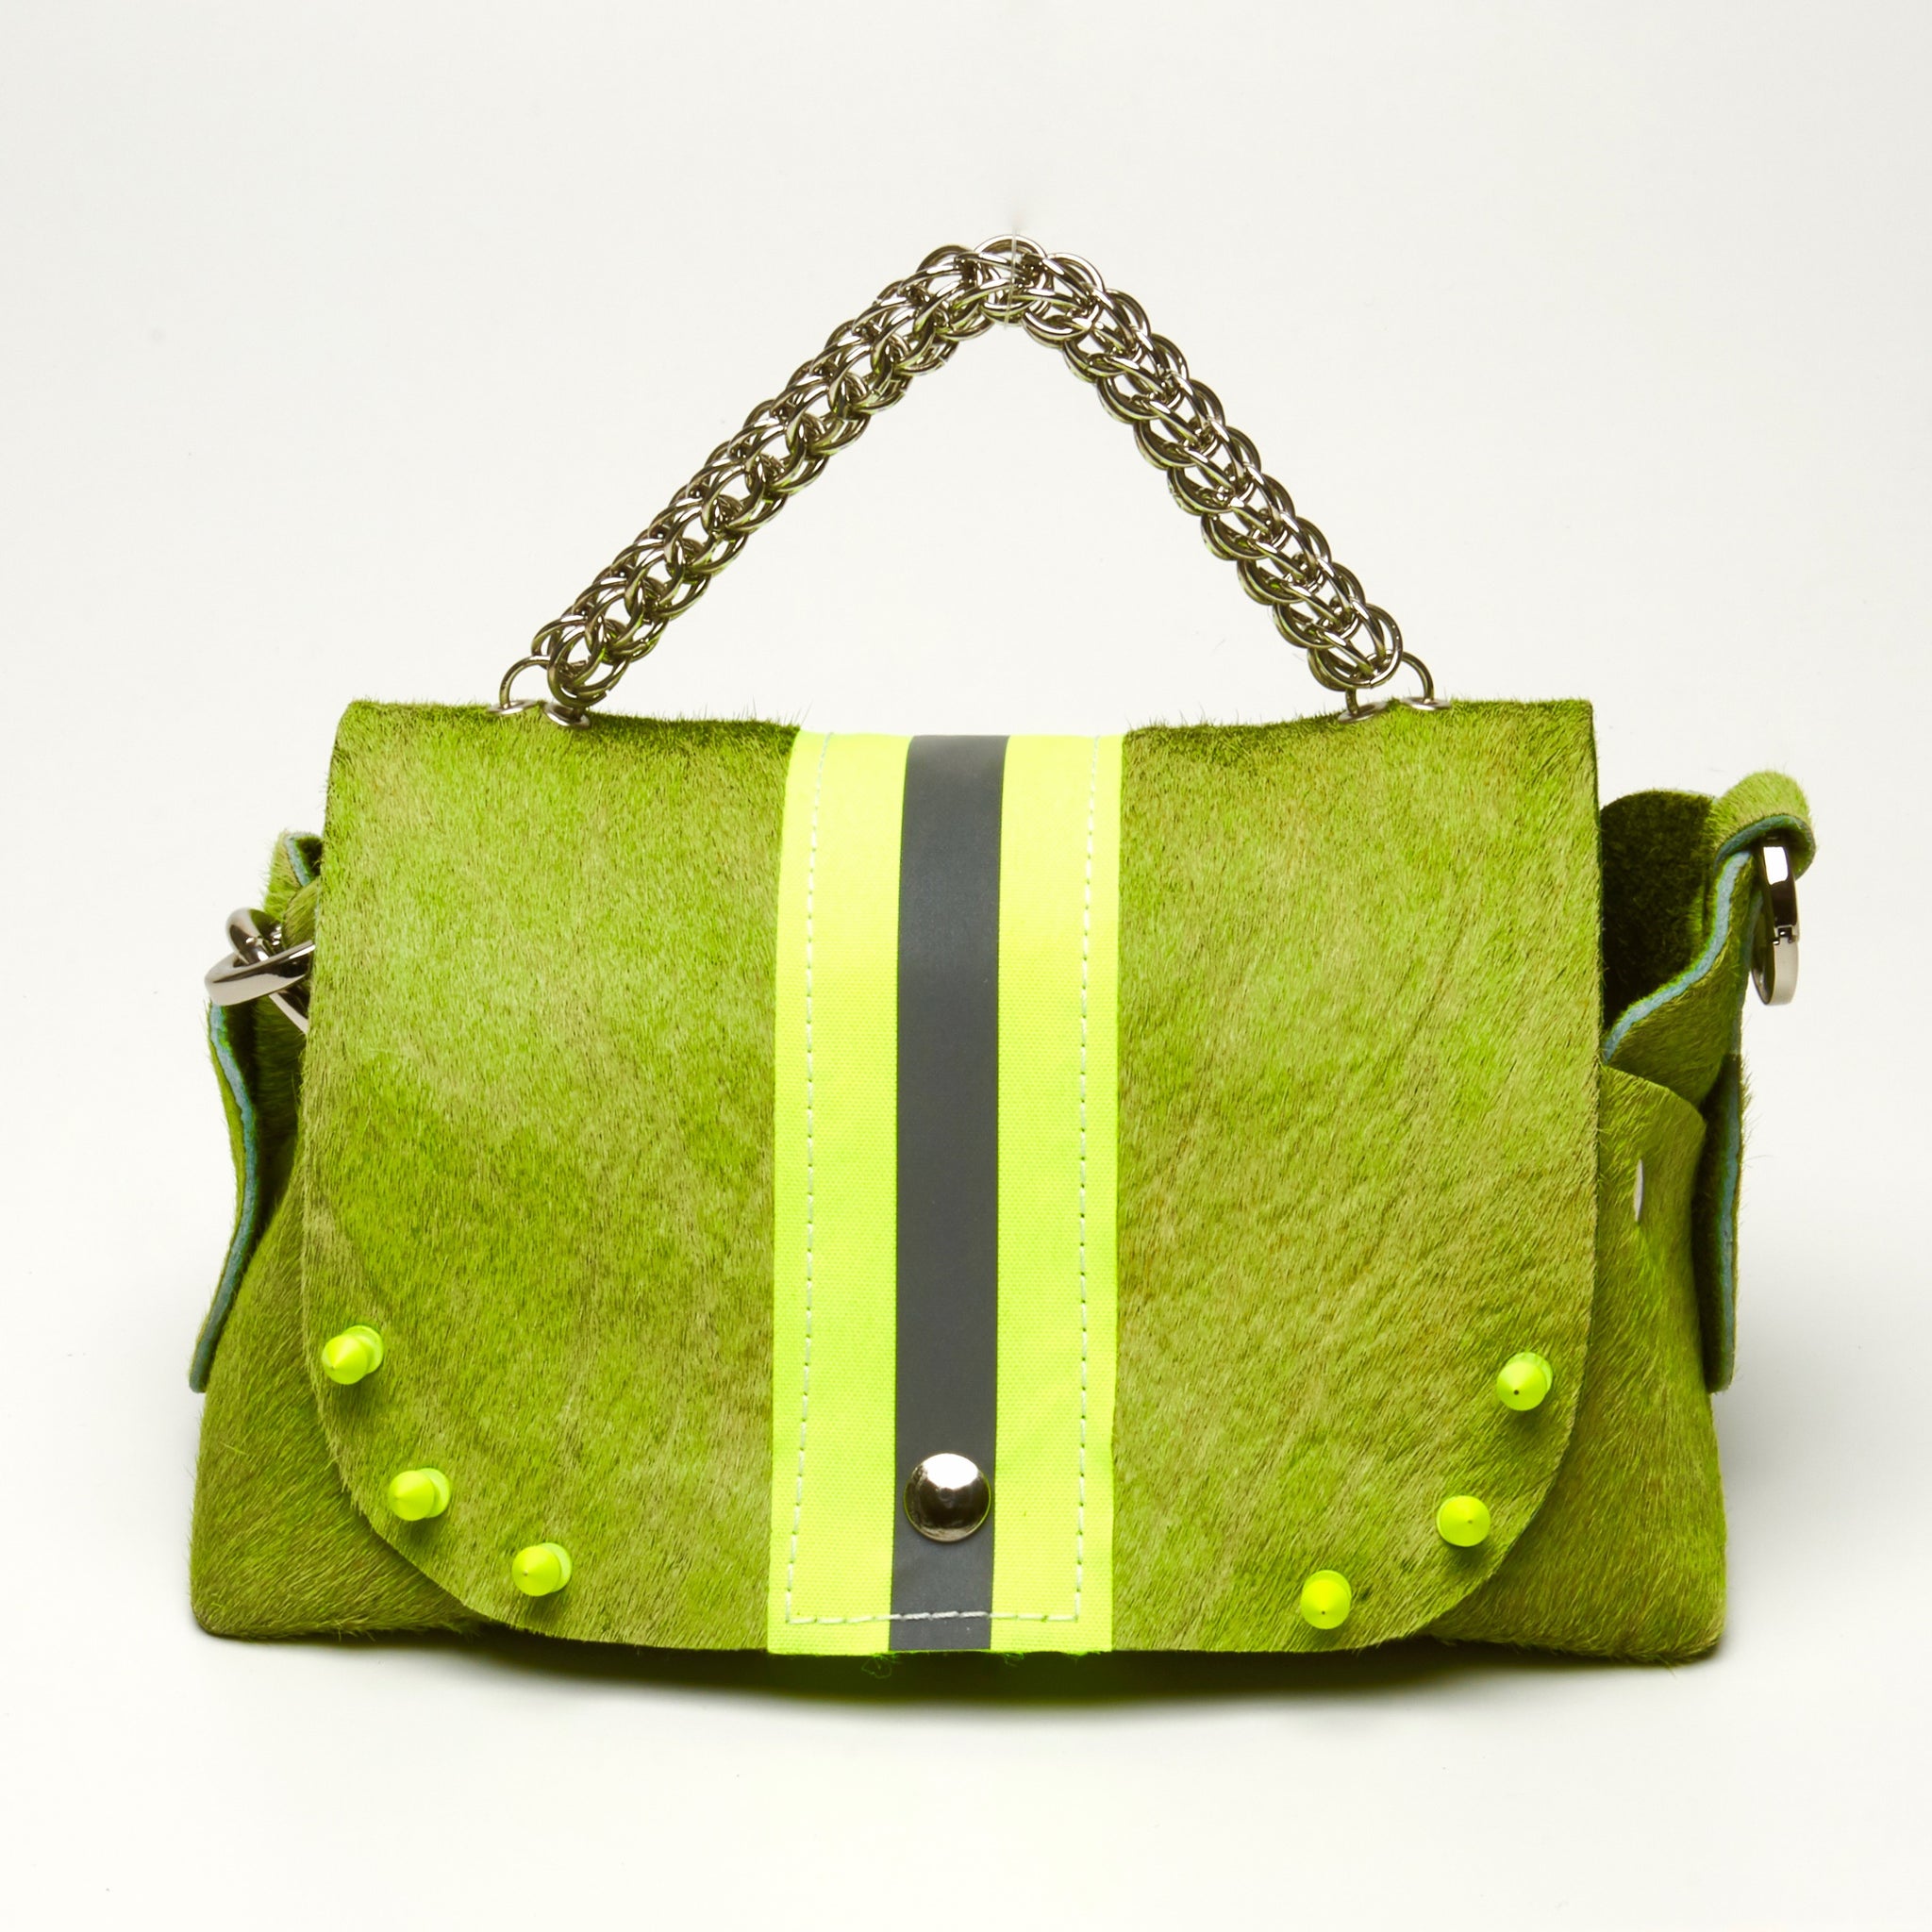 HAIR-ON COWHIDE LEATHER WITH WIDE NEON YELLOW REFLECTIVE TRIM RIVETED DAY-TO-EVENING BAG WITH STAINLESS STEEL METAL HARDWARE, CHAIN MAILLE HANDLE AND REMOVABLE SHOULDER STRAP.